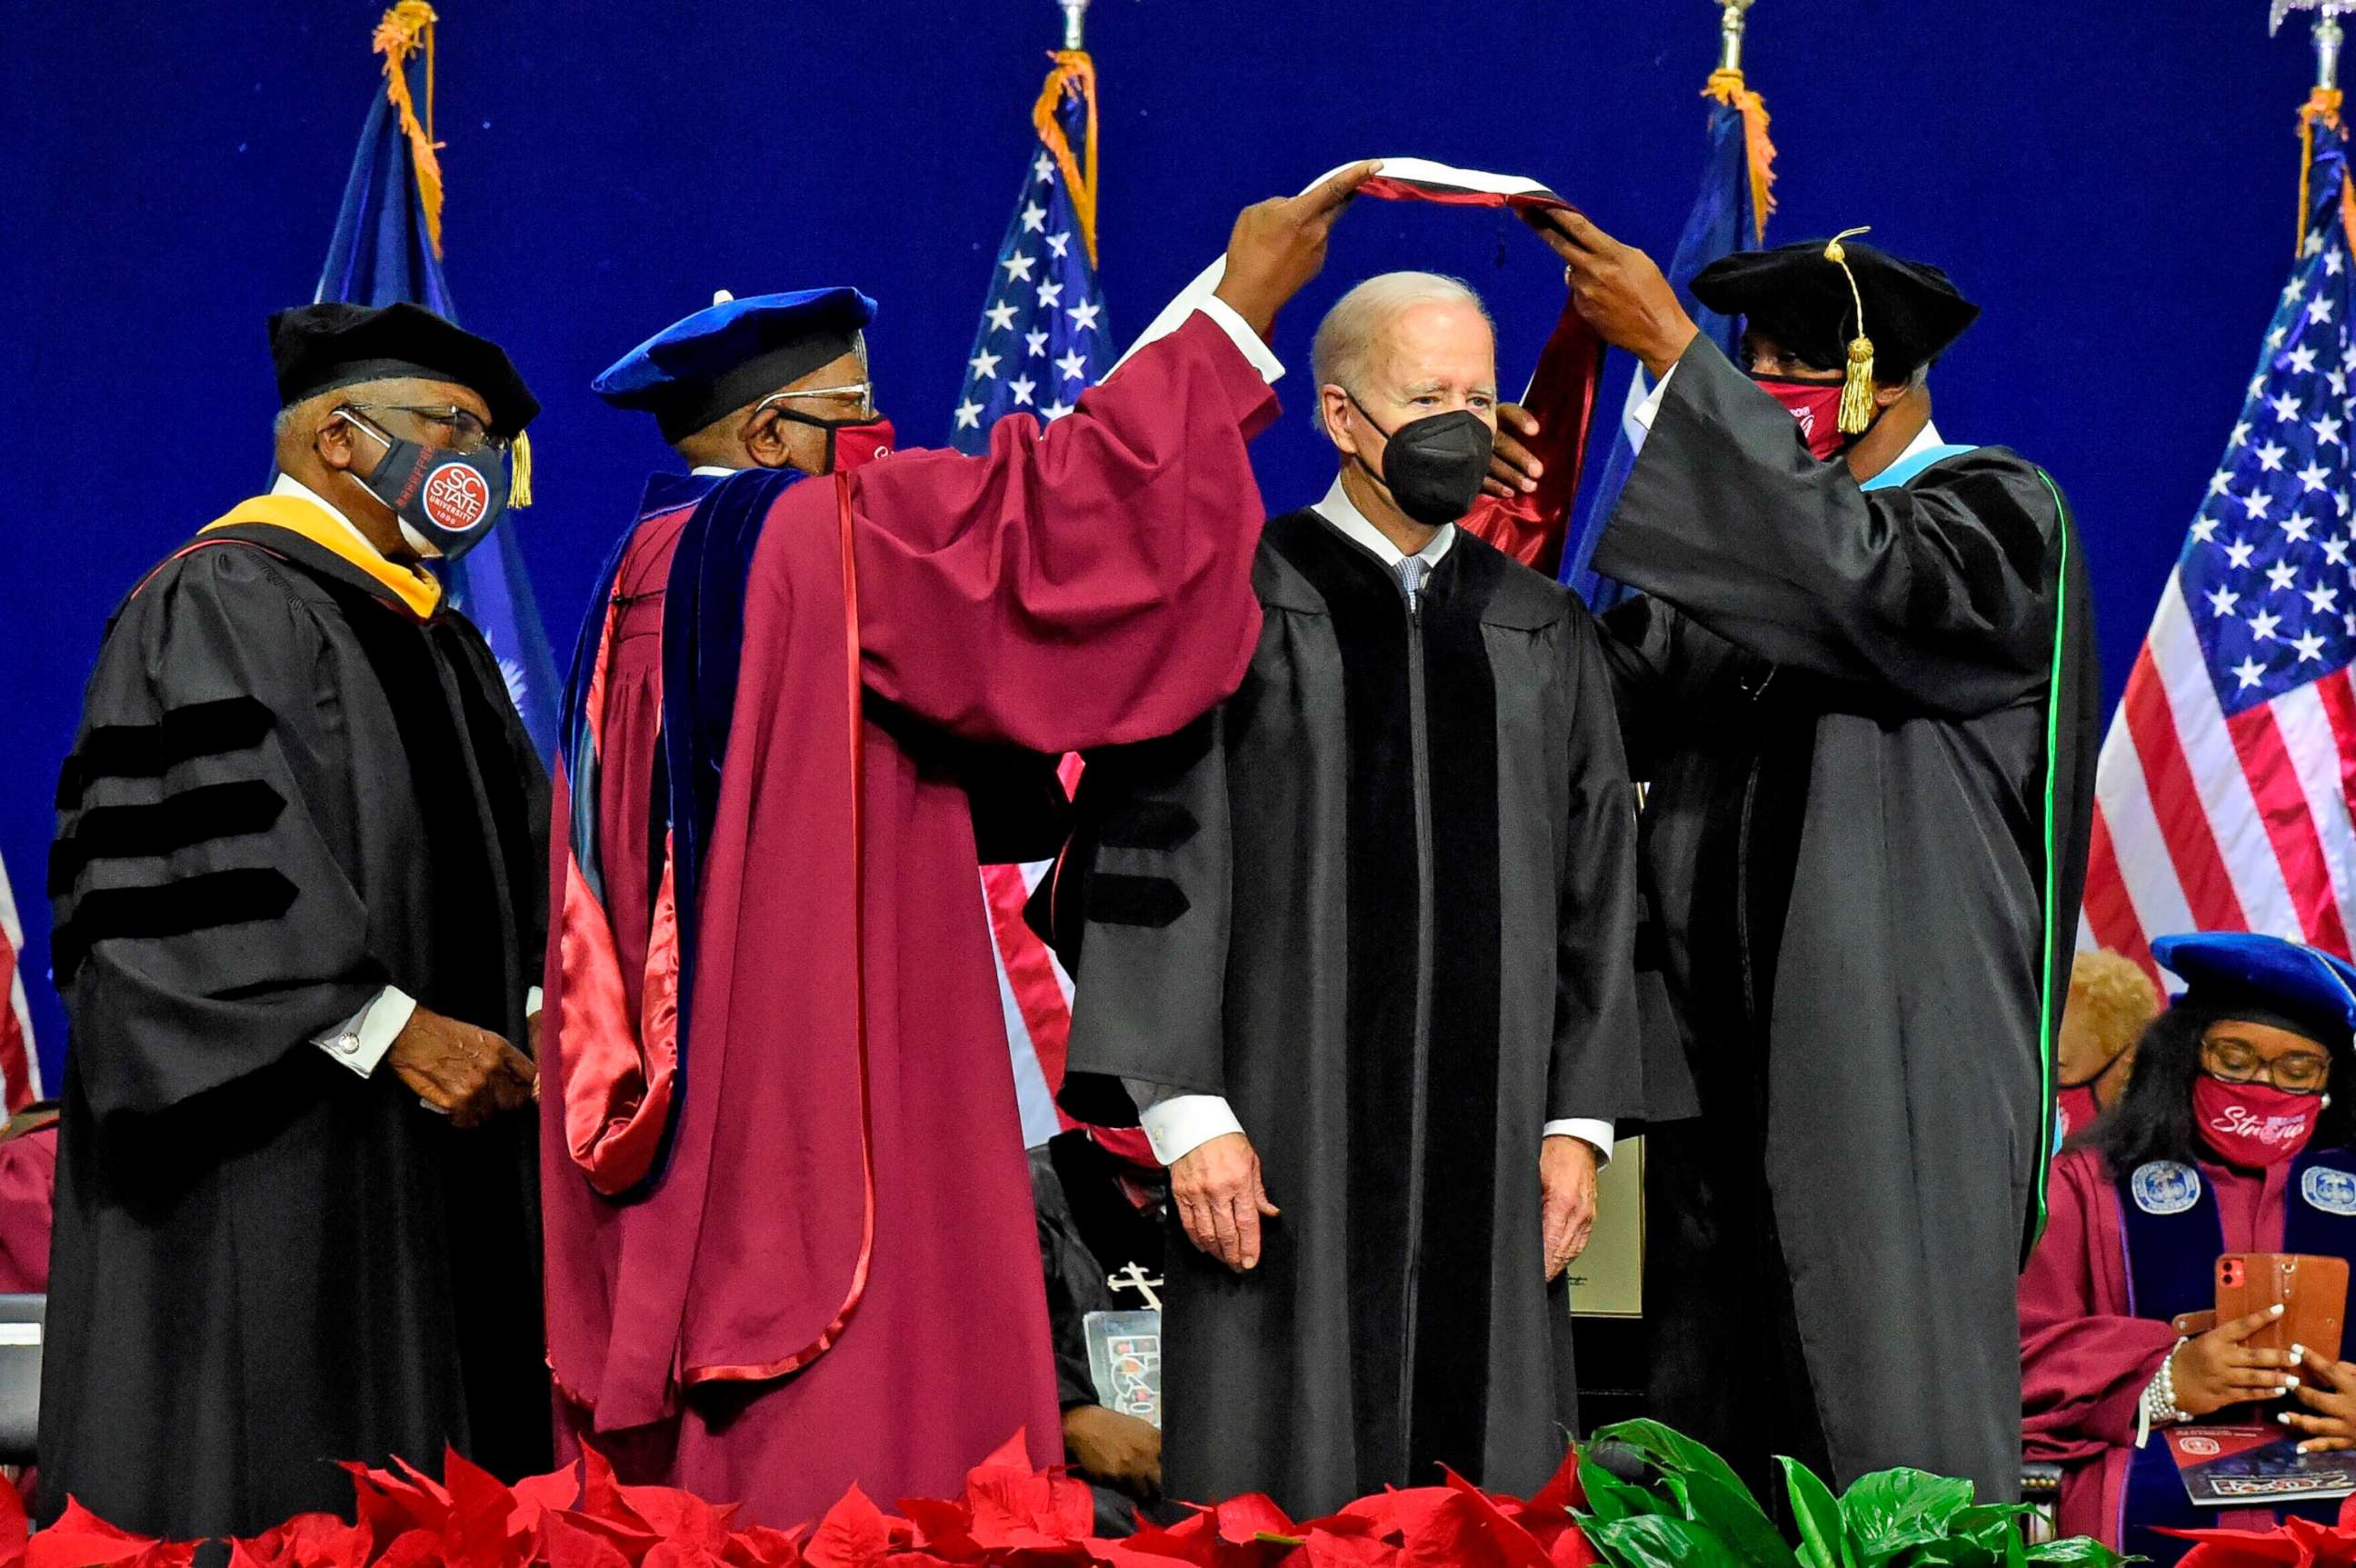 PHOTO: House Majority Whip Jim Clyburn looks on as President Joe Biden receives an honorary degree after speaking at South Carolina State University's 2021 Fall Commencement Ceremony in Orangeburg, S.C., Dec. 17, 2021.